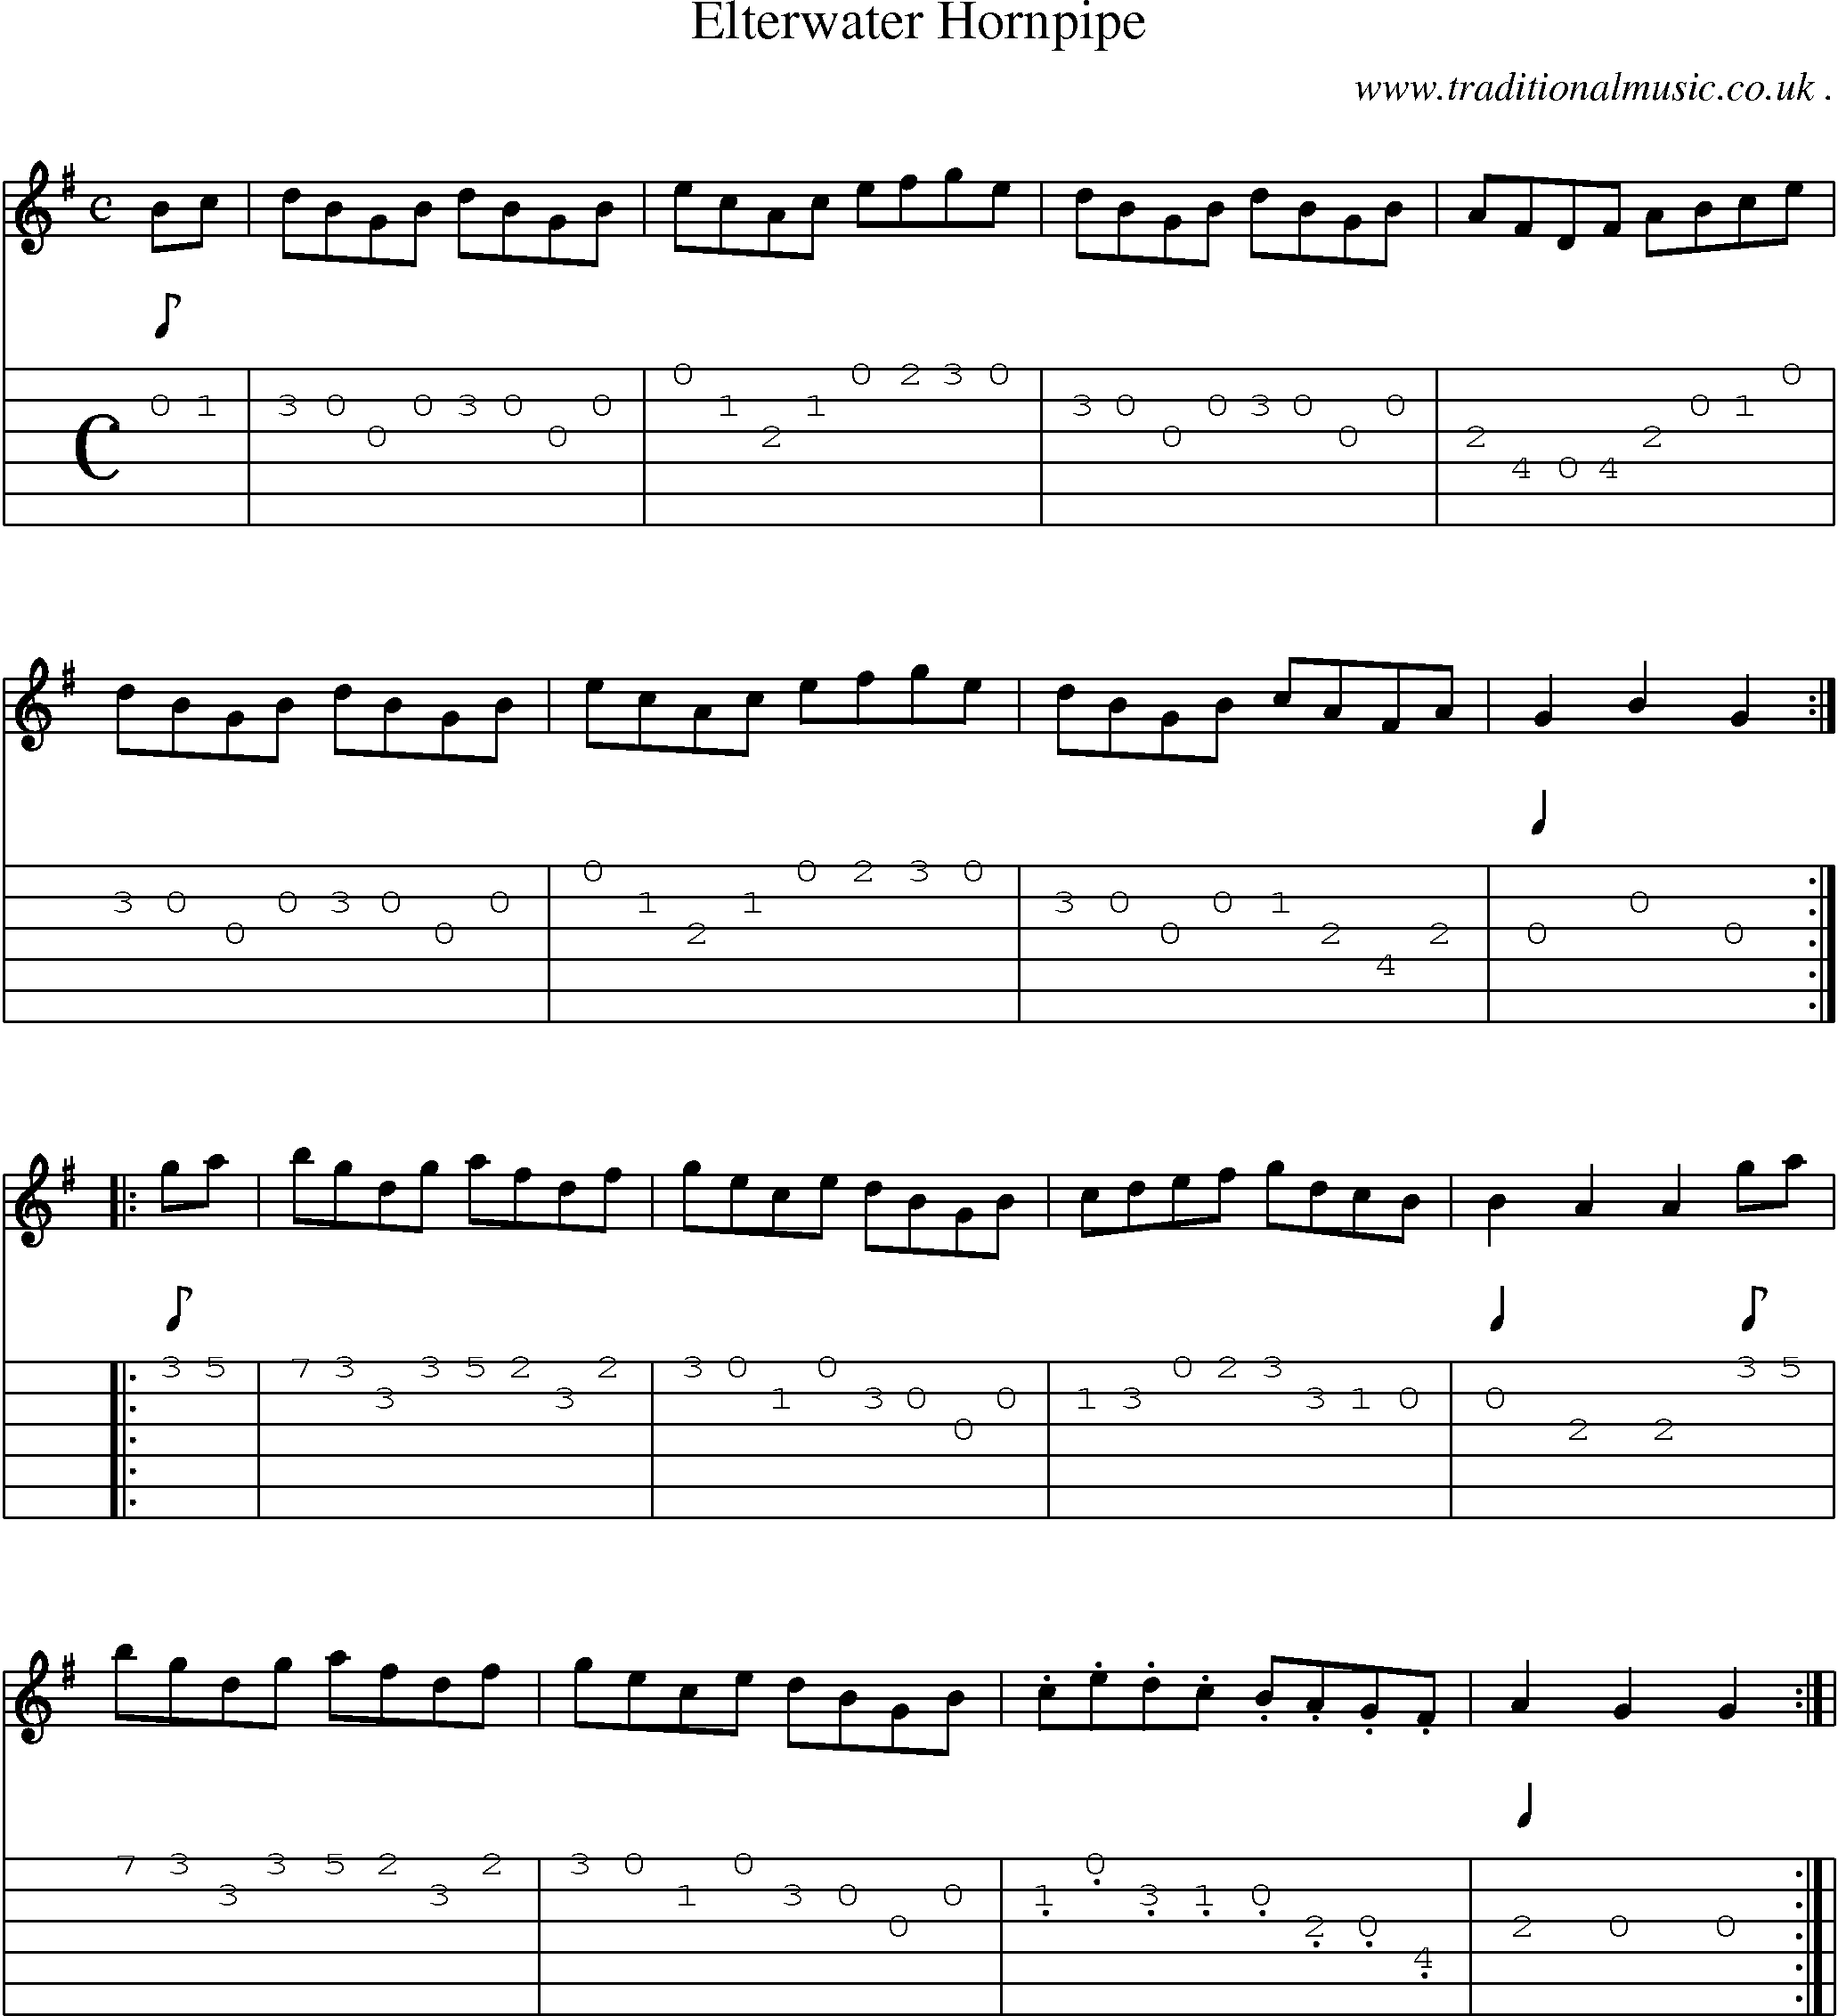 Sheet-Music and Guitar Tabs for Elterwater Hornpipe